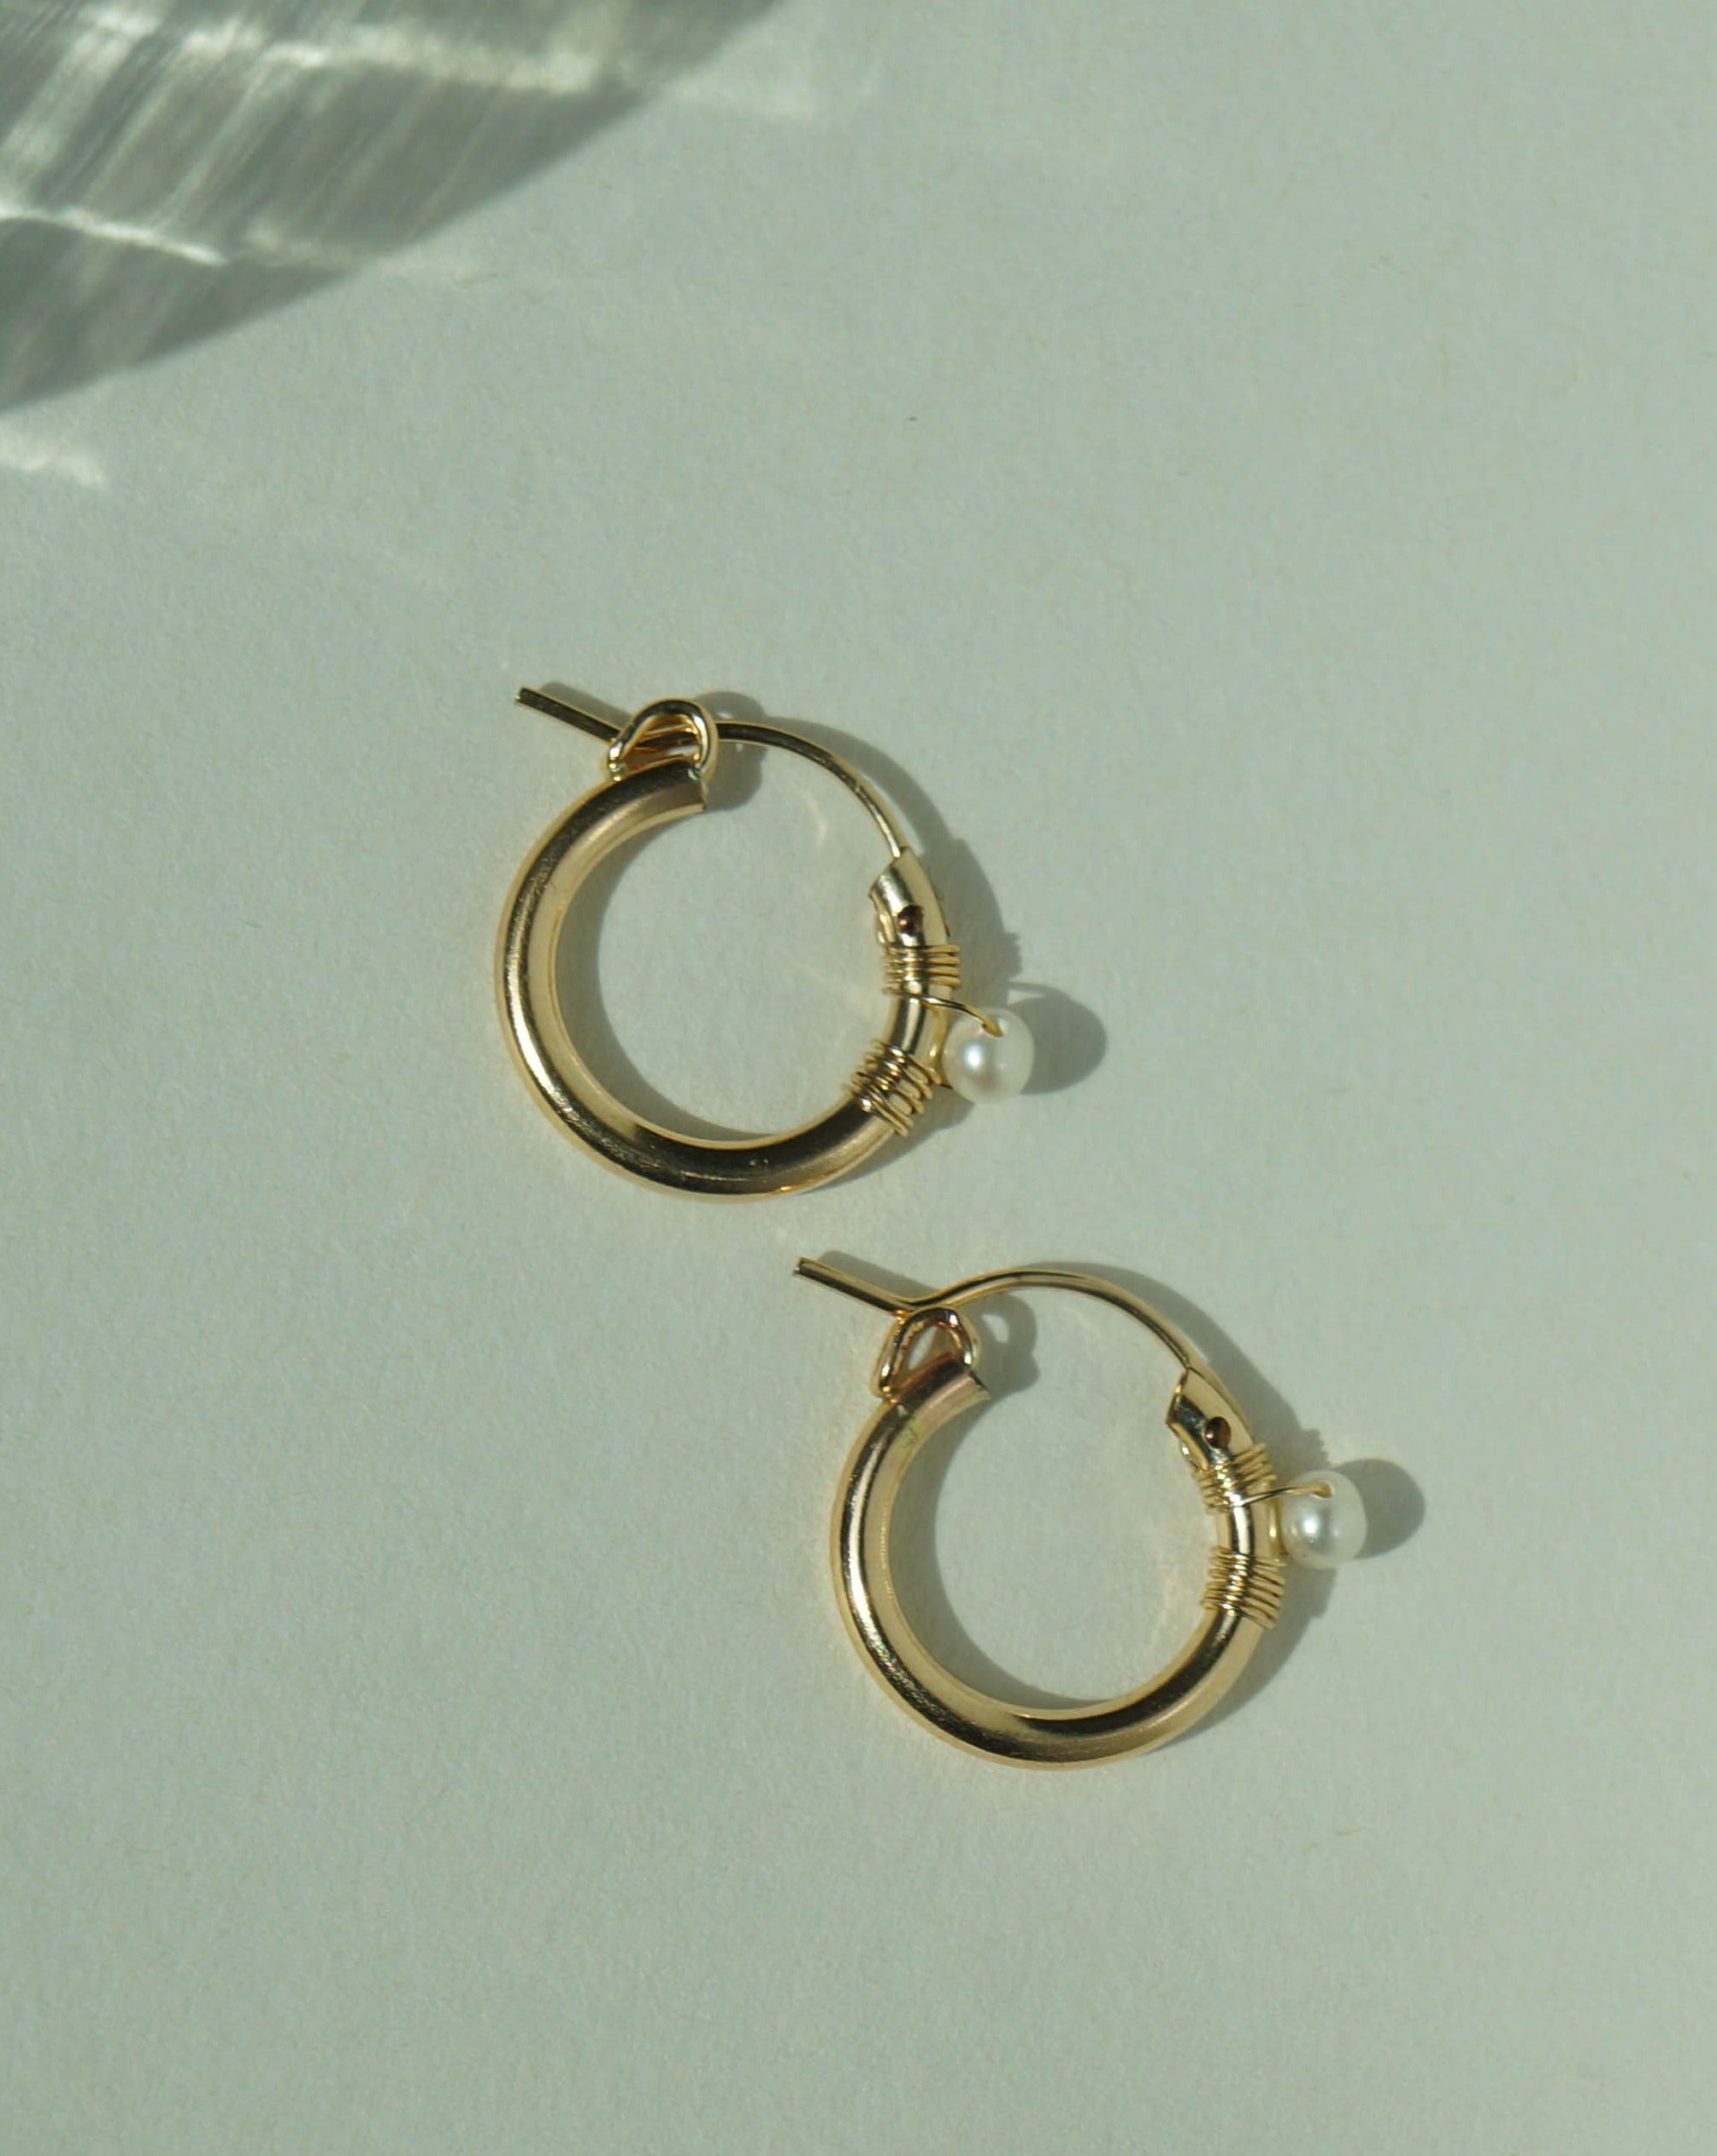 Natalie Earrings by KOZAKH. 12mm snap closure hoop earrings in 14K Gold Filled, featuring a 7mm white potato Pearl.